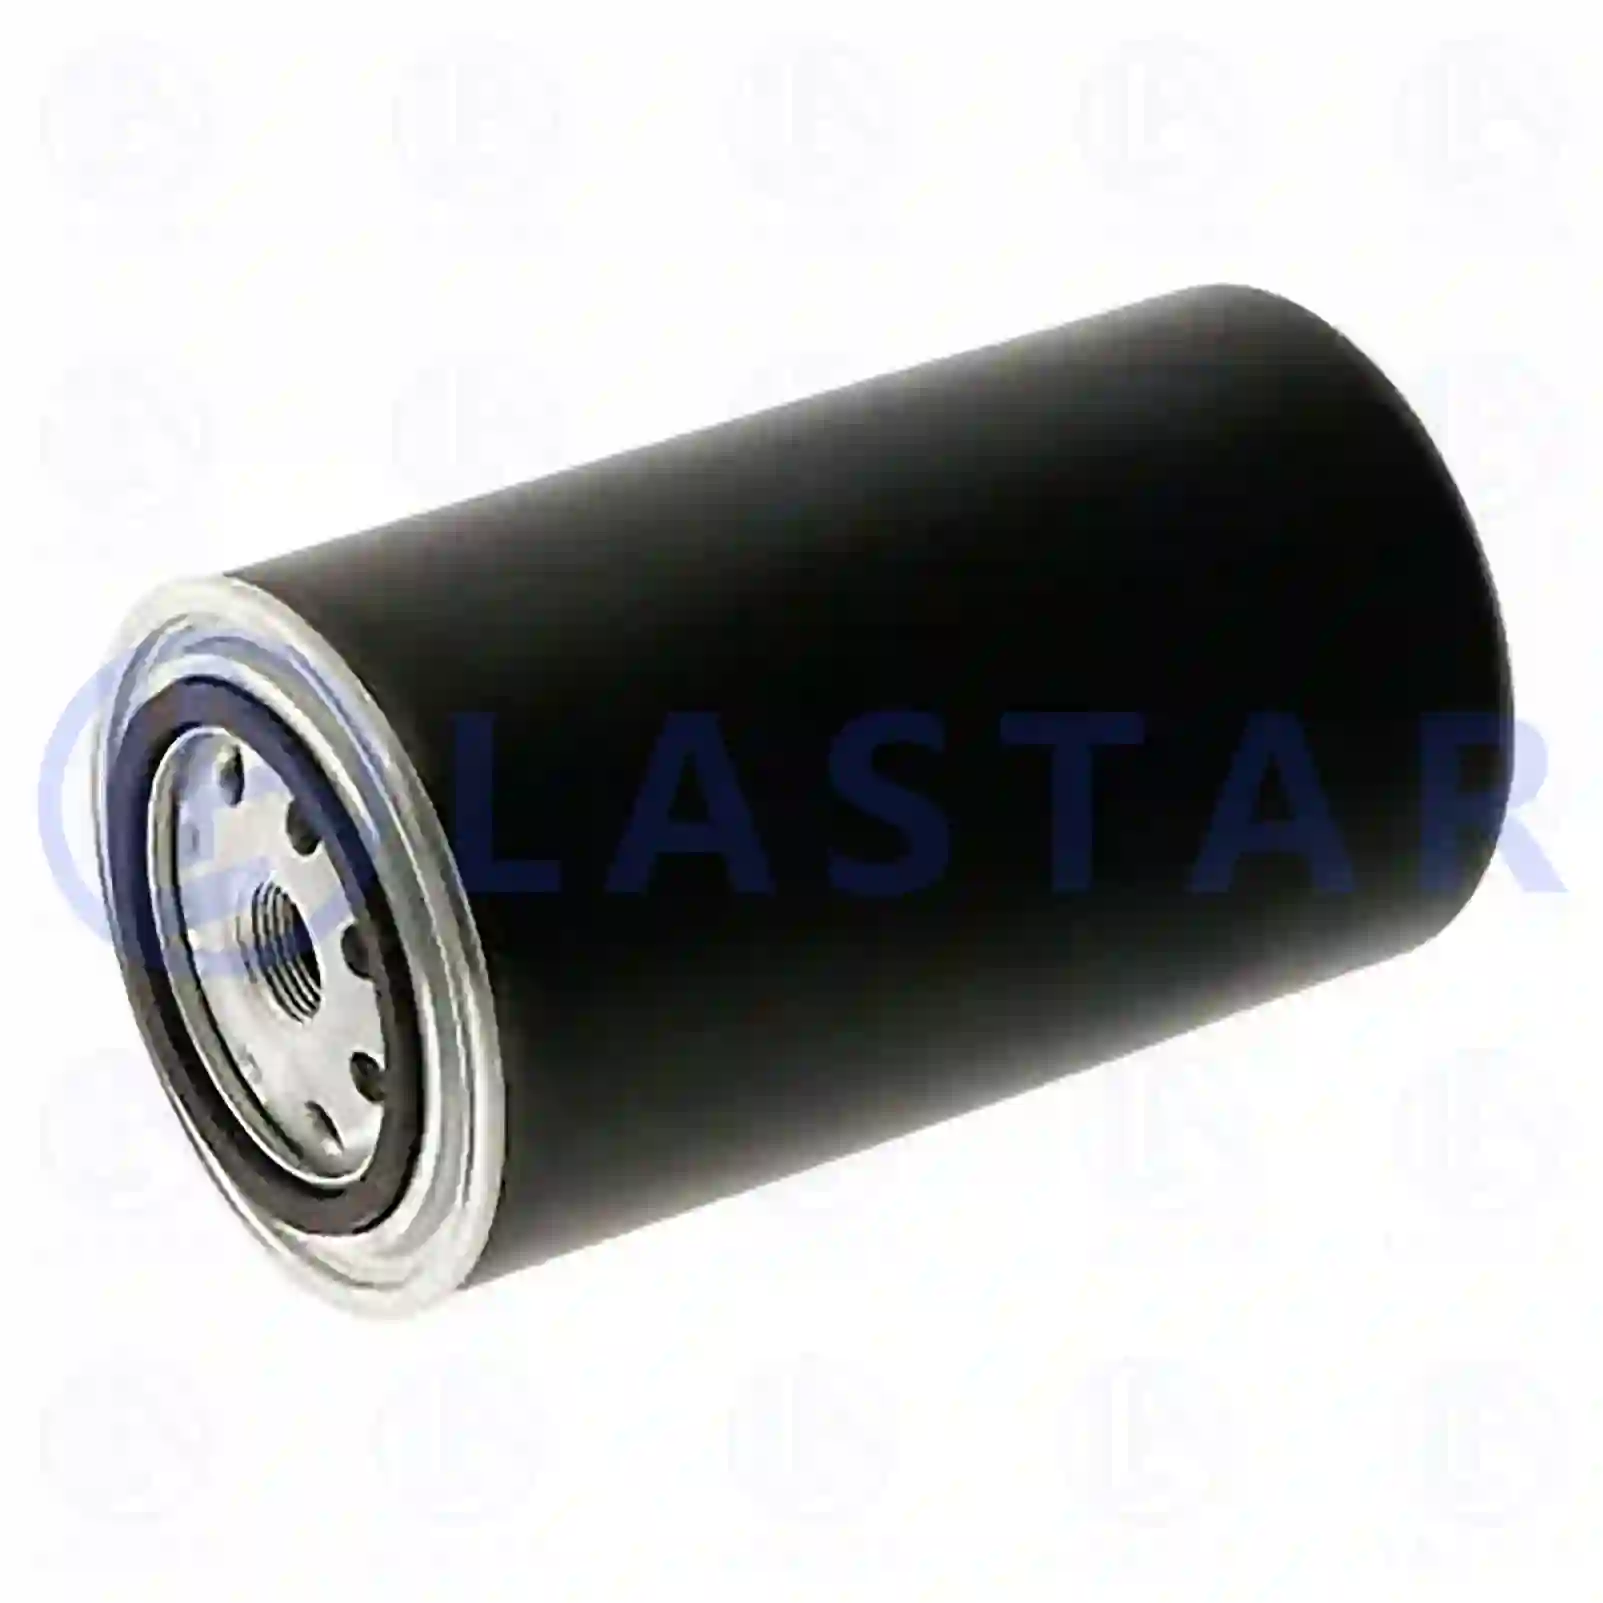 Fuel filter, water separator, 77724166, 1521994, 1529648, 1618993, ZG10164-0008 ||  77724166 Lastar Spare Part | Truck Spare Parts, Auotomotive Spare Parts Fuel filter, water separator, 77724166, 1521994, 1529648, 1618993, ZG10164-0008 ||  77724166 Lastar Spare Part | Truck Spare Parts, Auotomotive Spare Parts